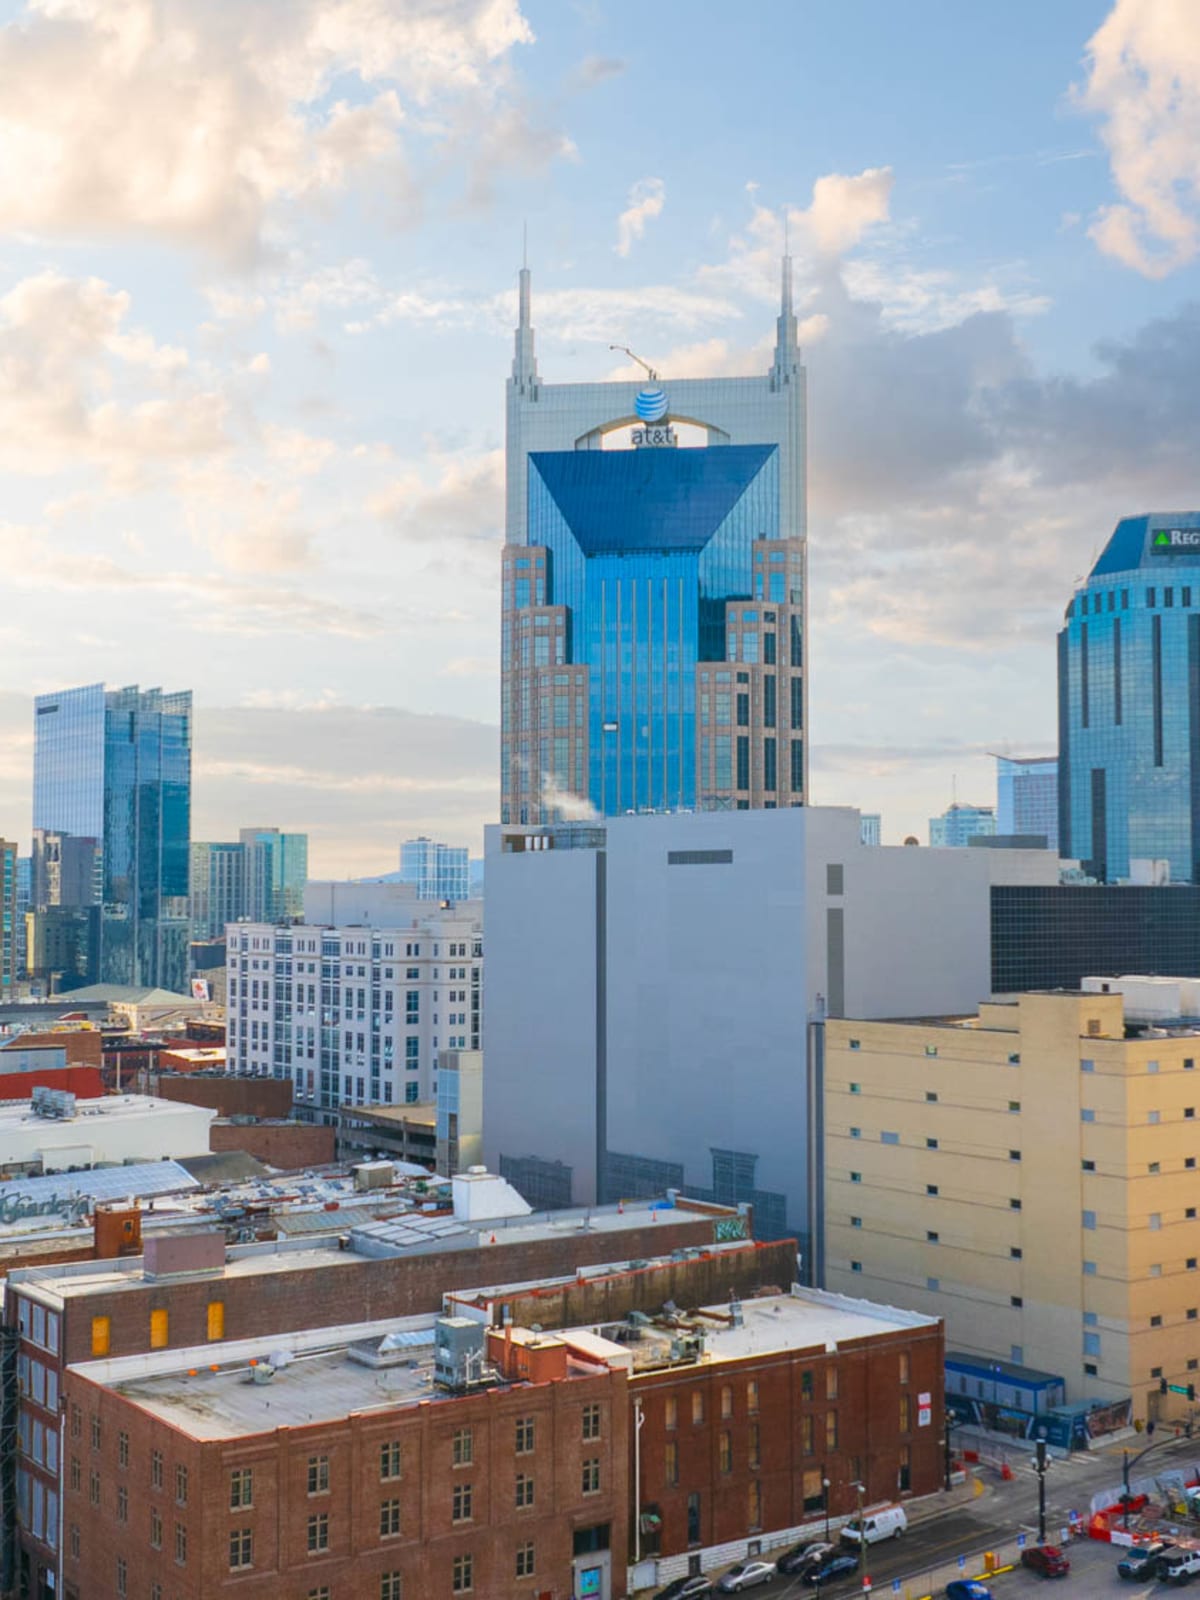 Downtown Nashville, Tennessee, close to The Scottie